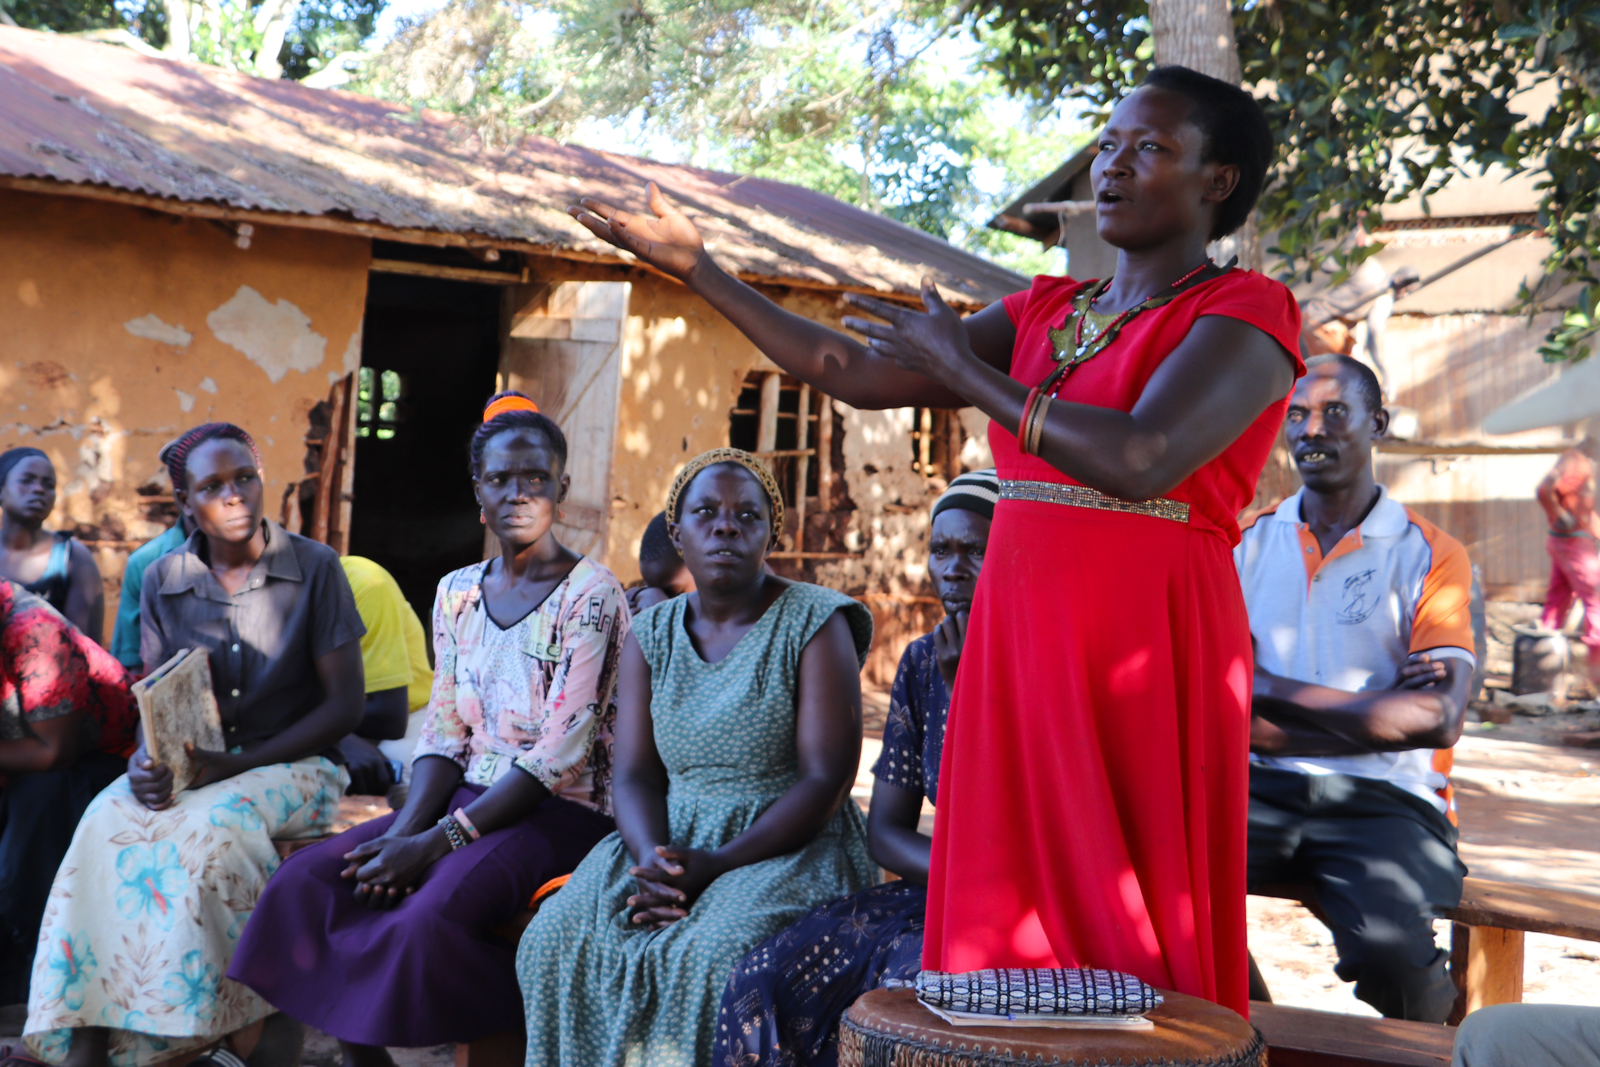 At an outdoor meeting of farmers in Uganda, a woman stands and speaks to the group